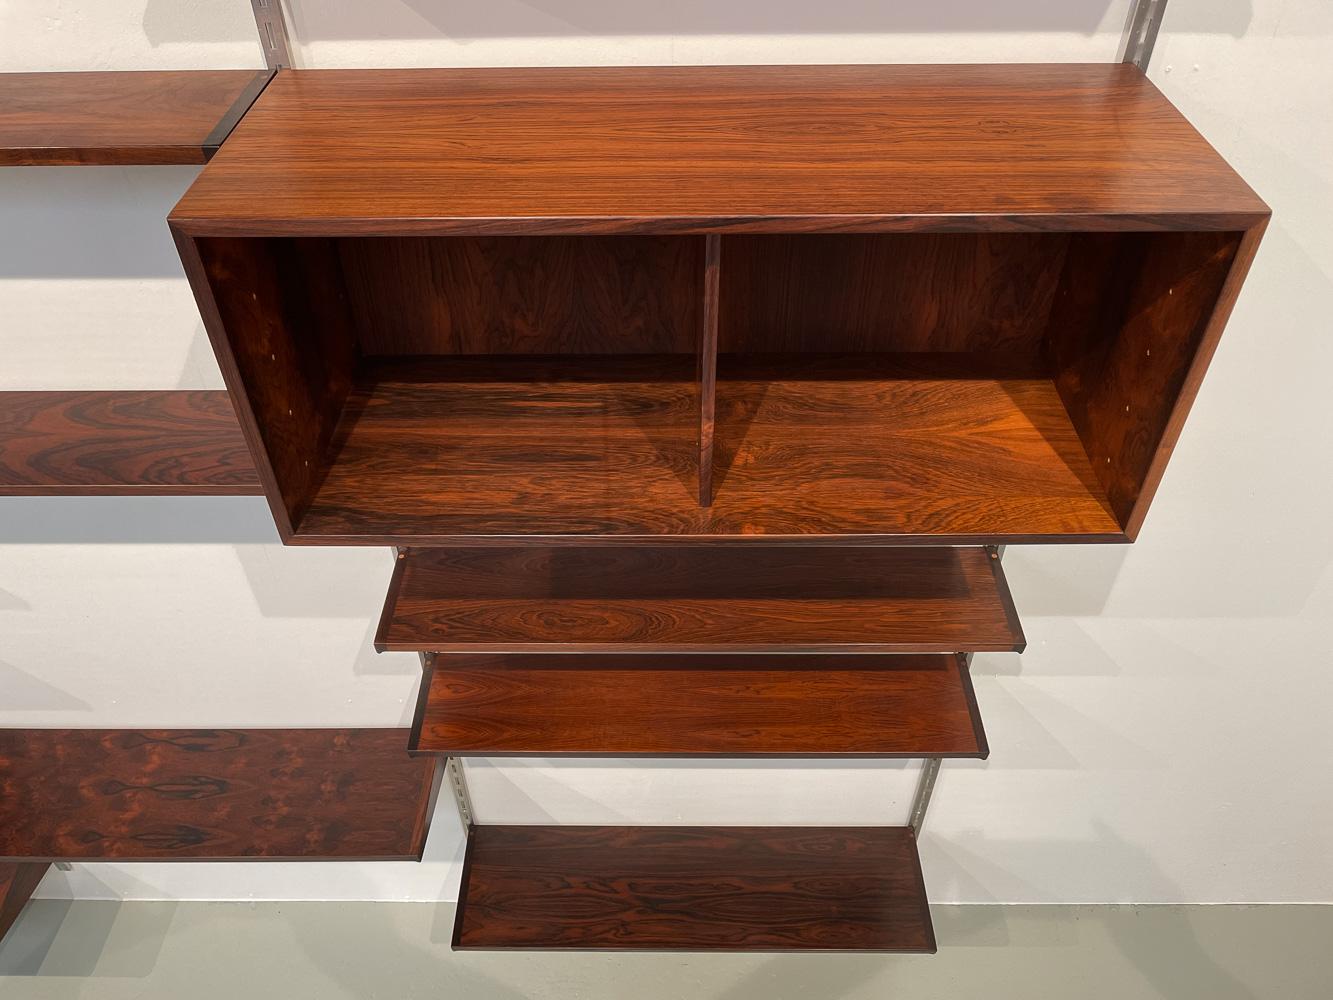 Vintage Danish Rosewood 3-Bay Wall Unit by Kai Kristiansen for FM, 1960s For Sale 5